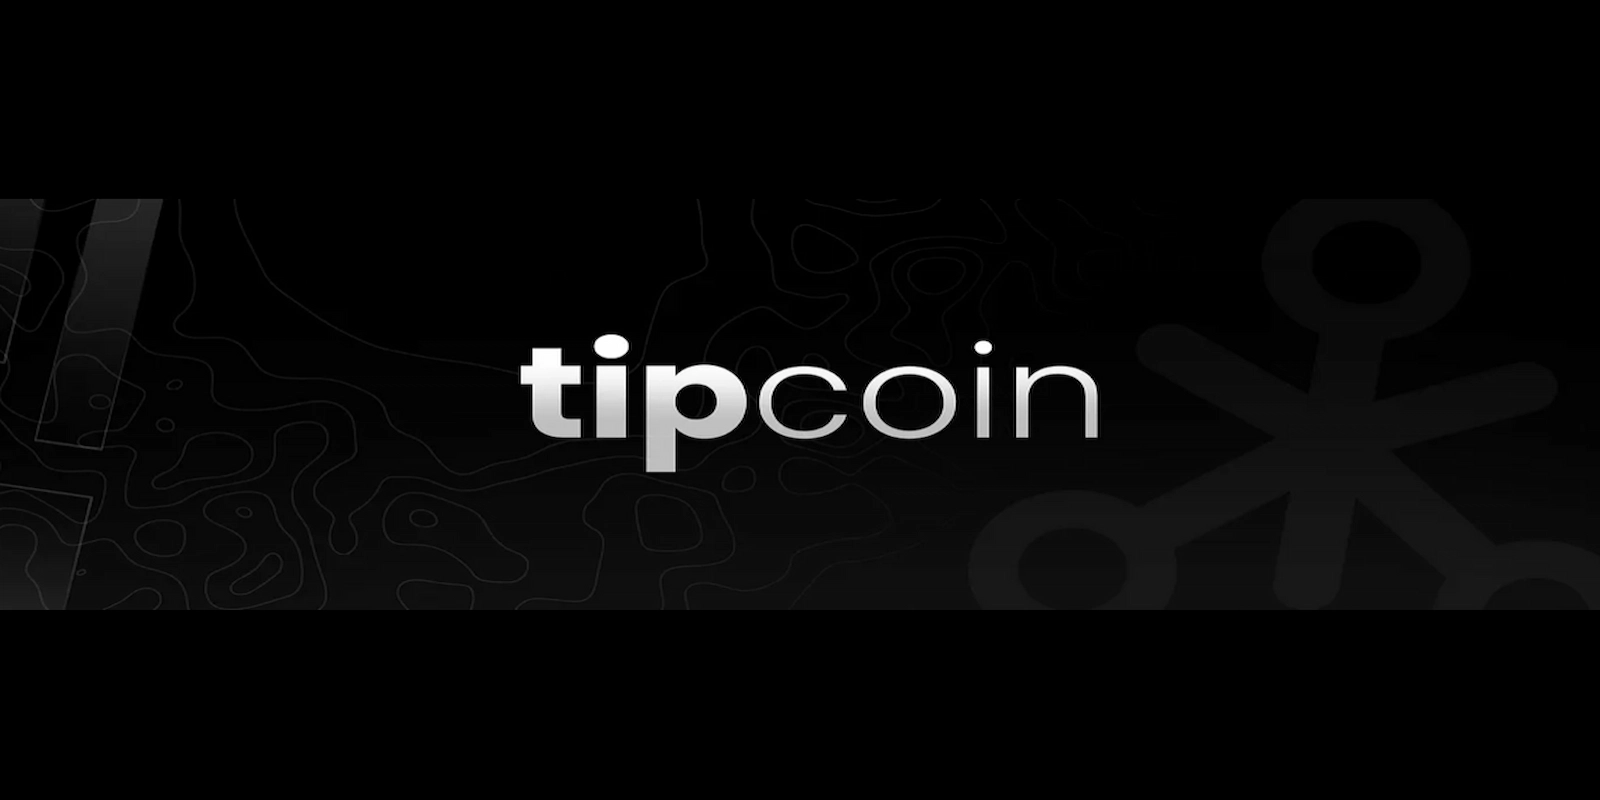 Tipcoin price rallied to a new ATH before plummeting.